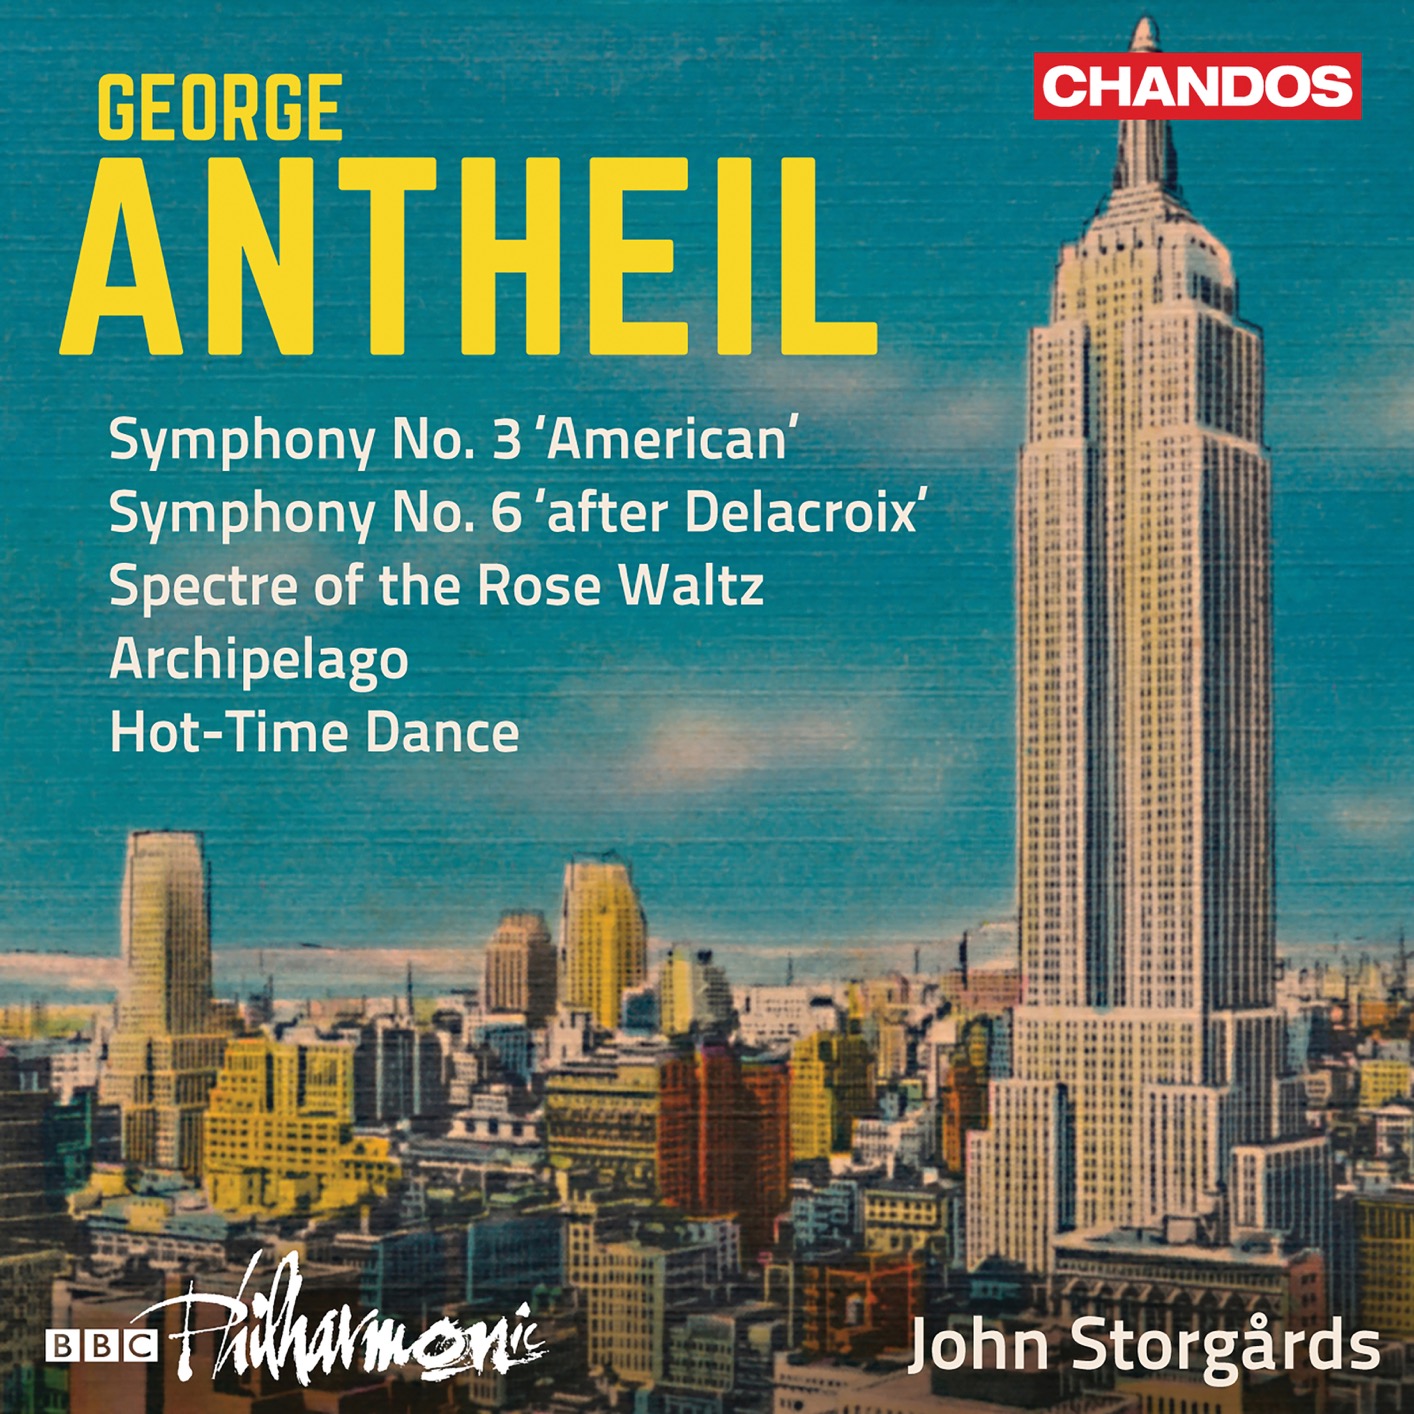 BBC Philharmonic Orchestra & John Storgards - Antheil: Symphonies Nos. 3 & 6 and Other Works (2019) [FLAC 24bit/96kHz]